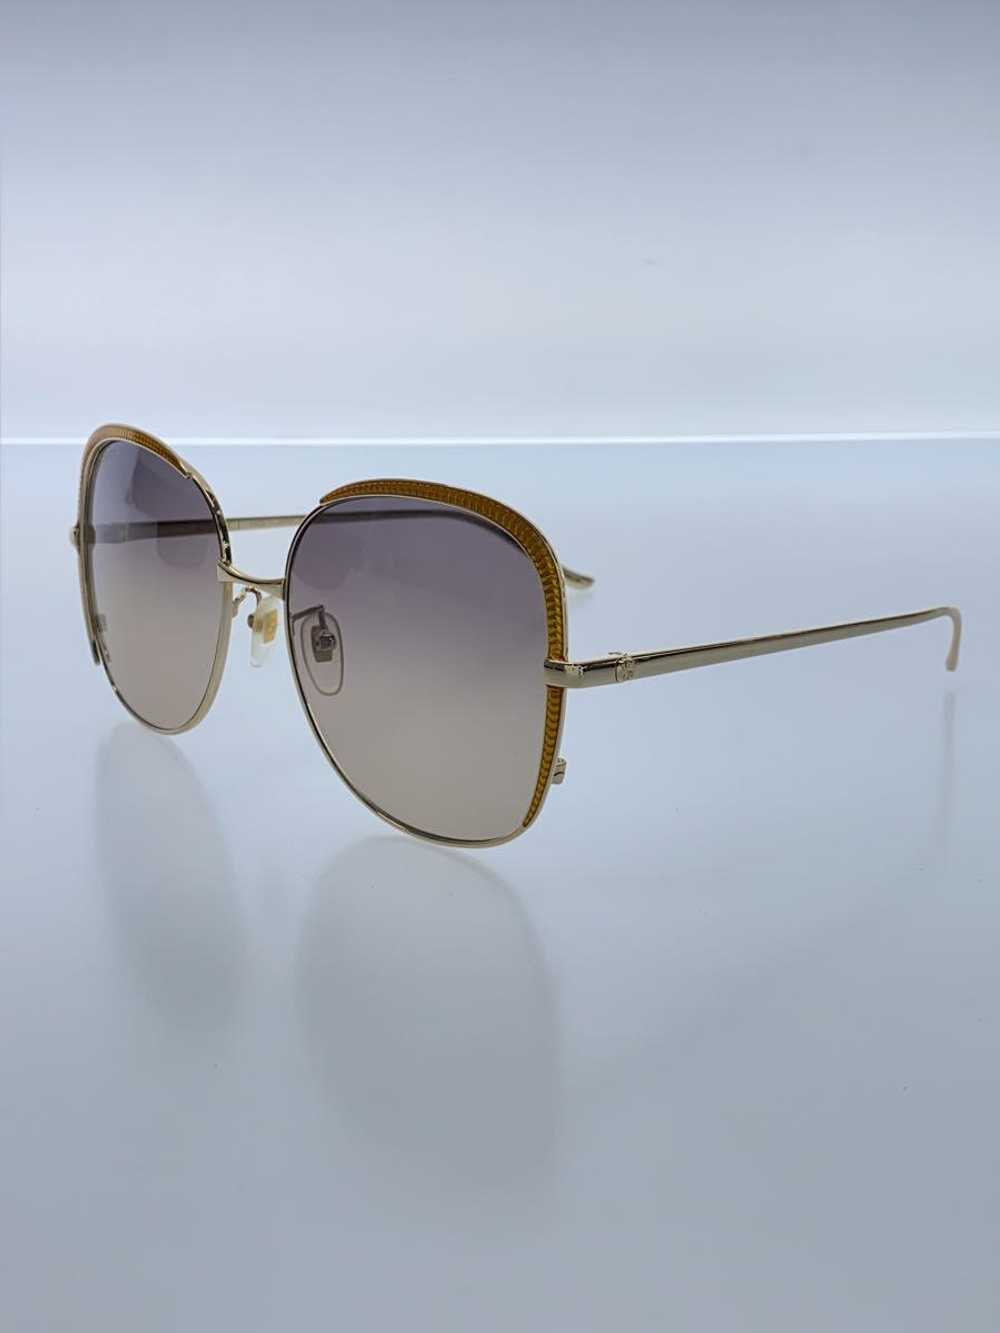 Used Gucci Sunglasses/Gry/Ladies/Gg0400S - image 2